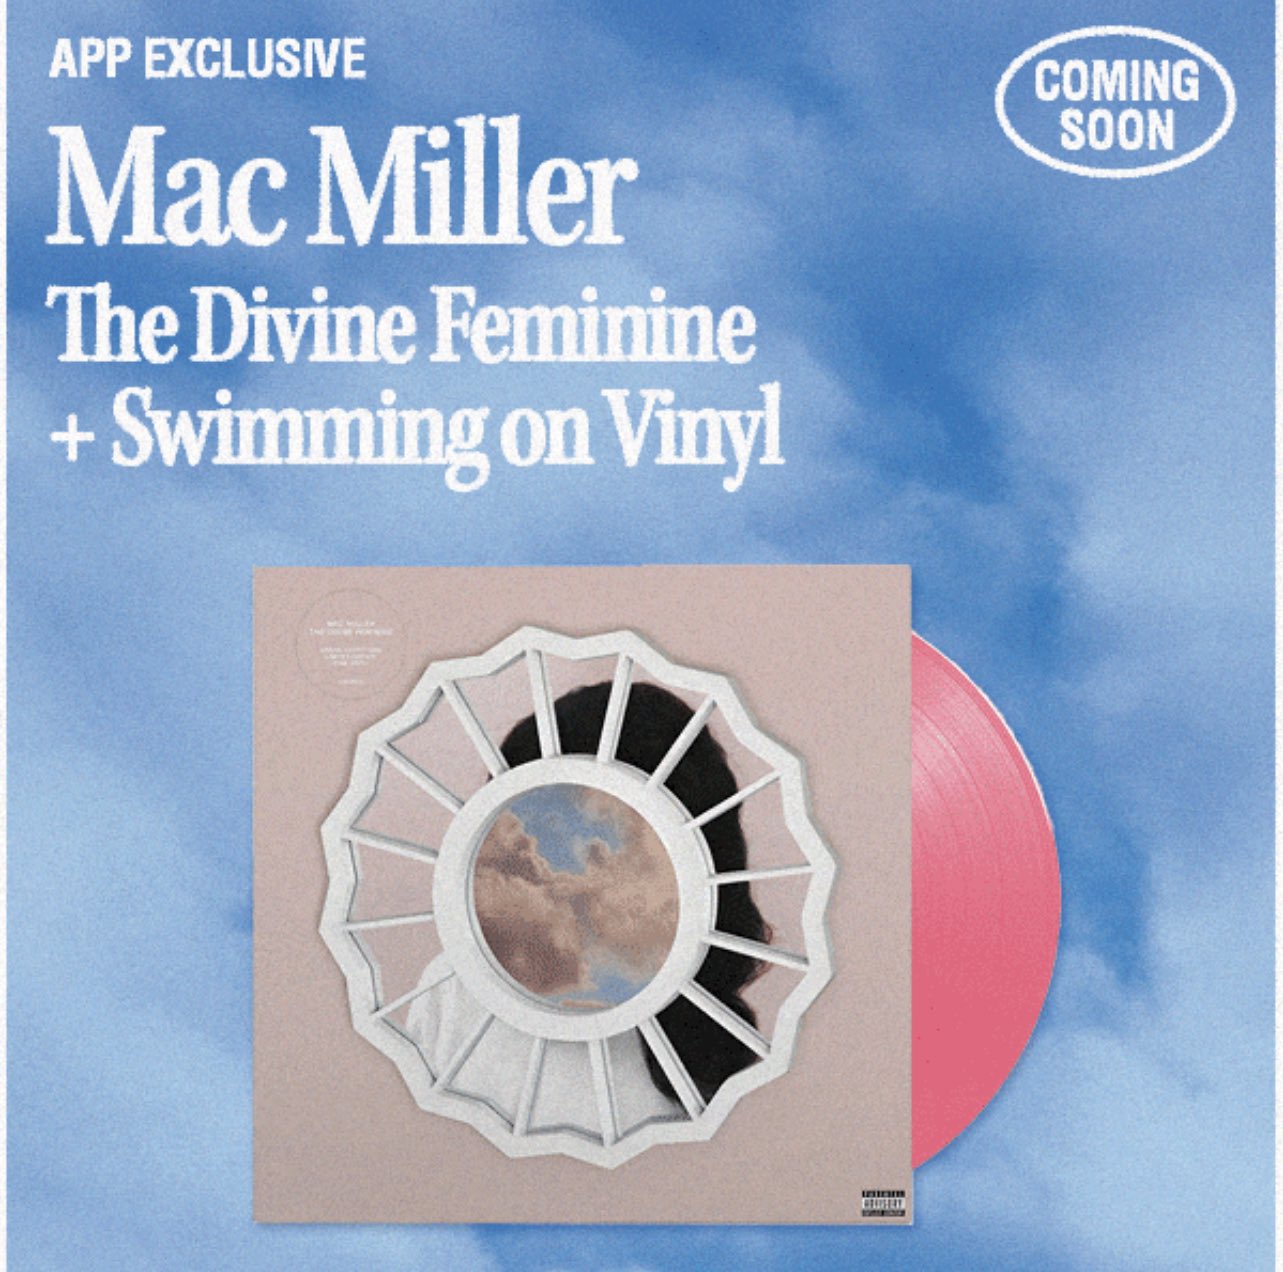 on Twitter: "Mac Miller — The Divine Feminine Pink Repress *UPCOMING RELEASE* tomorrow. only through the APP! https://t.co/BmiYCJqdyk" / Twitter